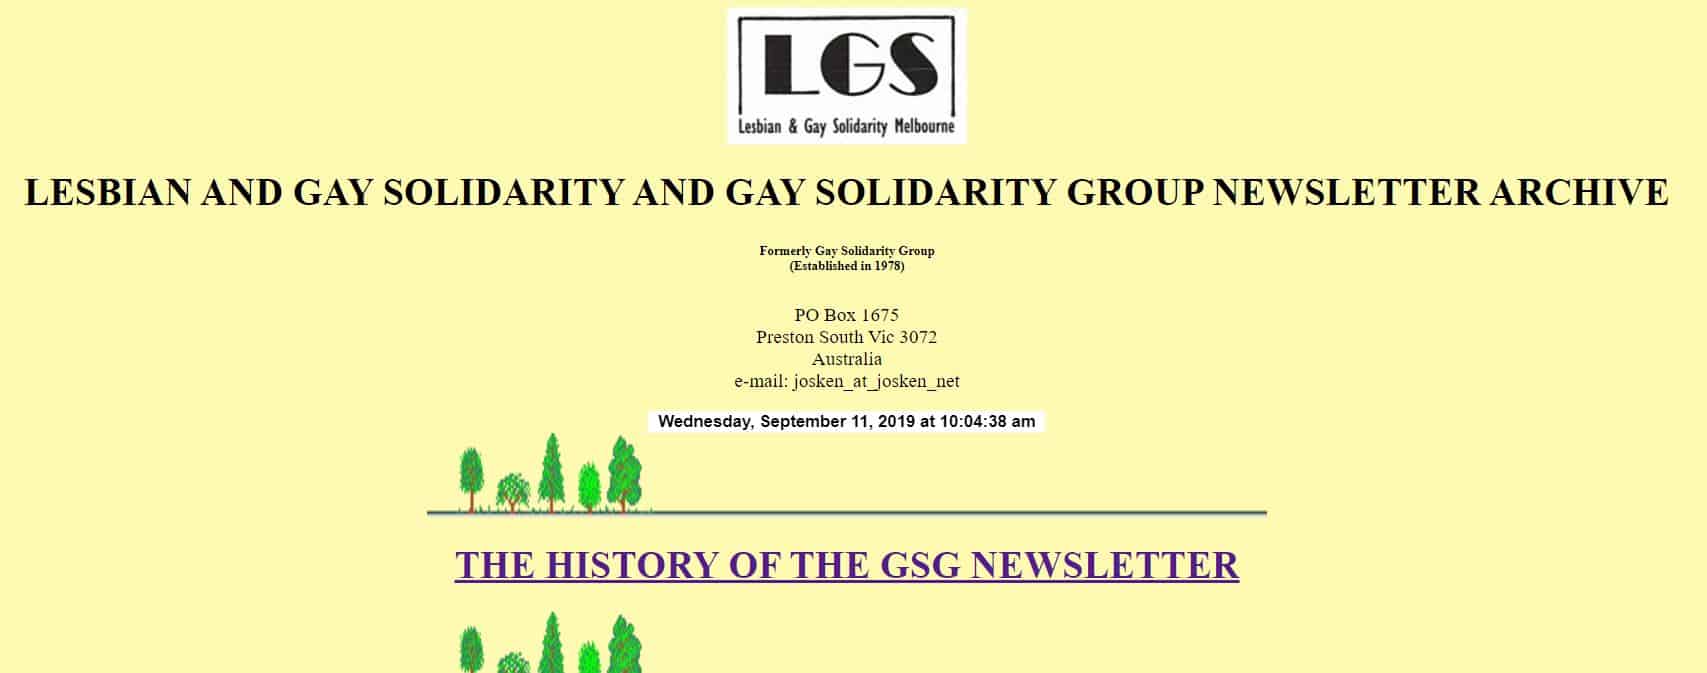 front page of Lesbian and gay solidarity group newsletter archive